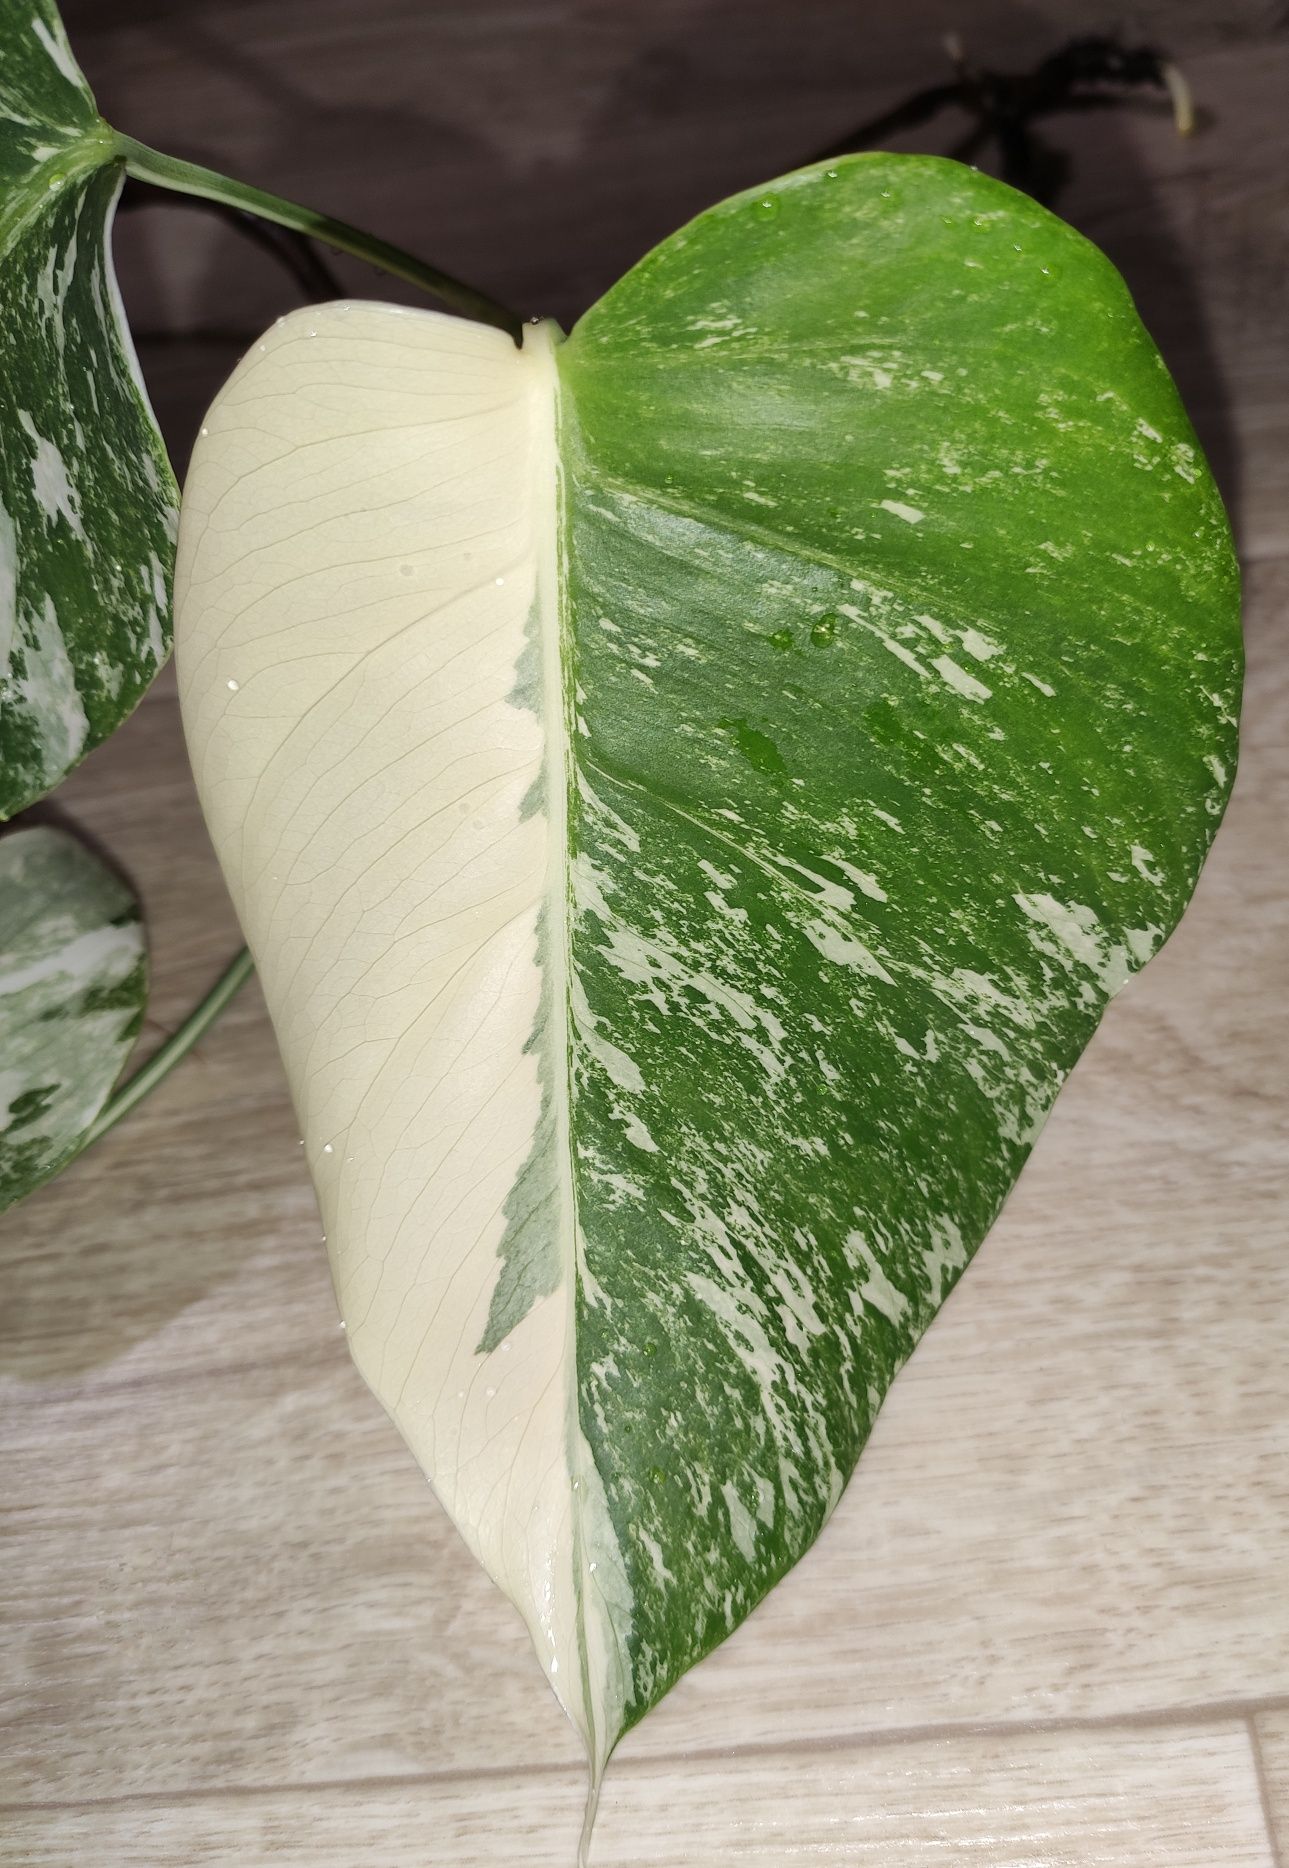 Monstera, philodendron, syngonium